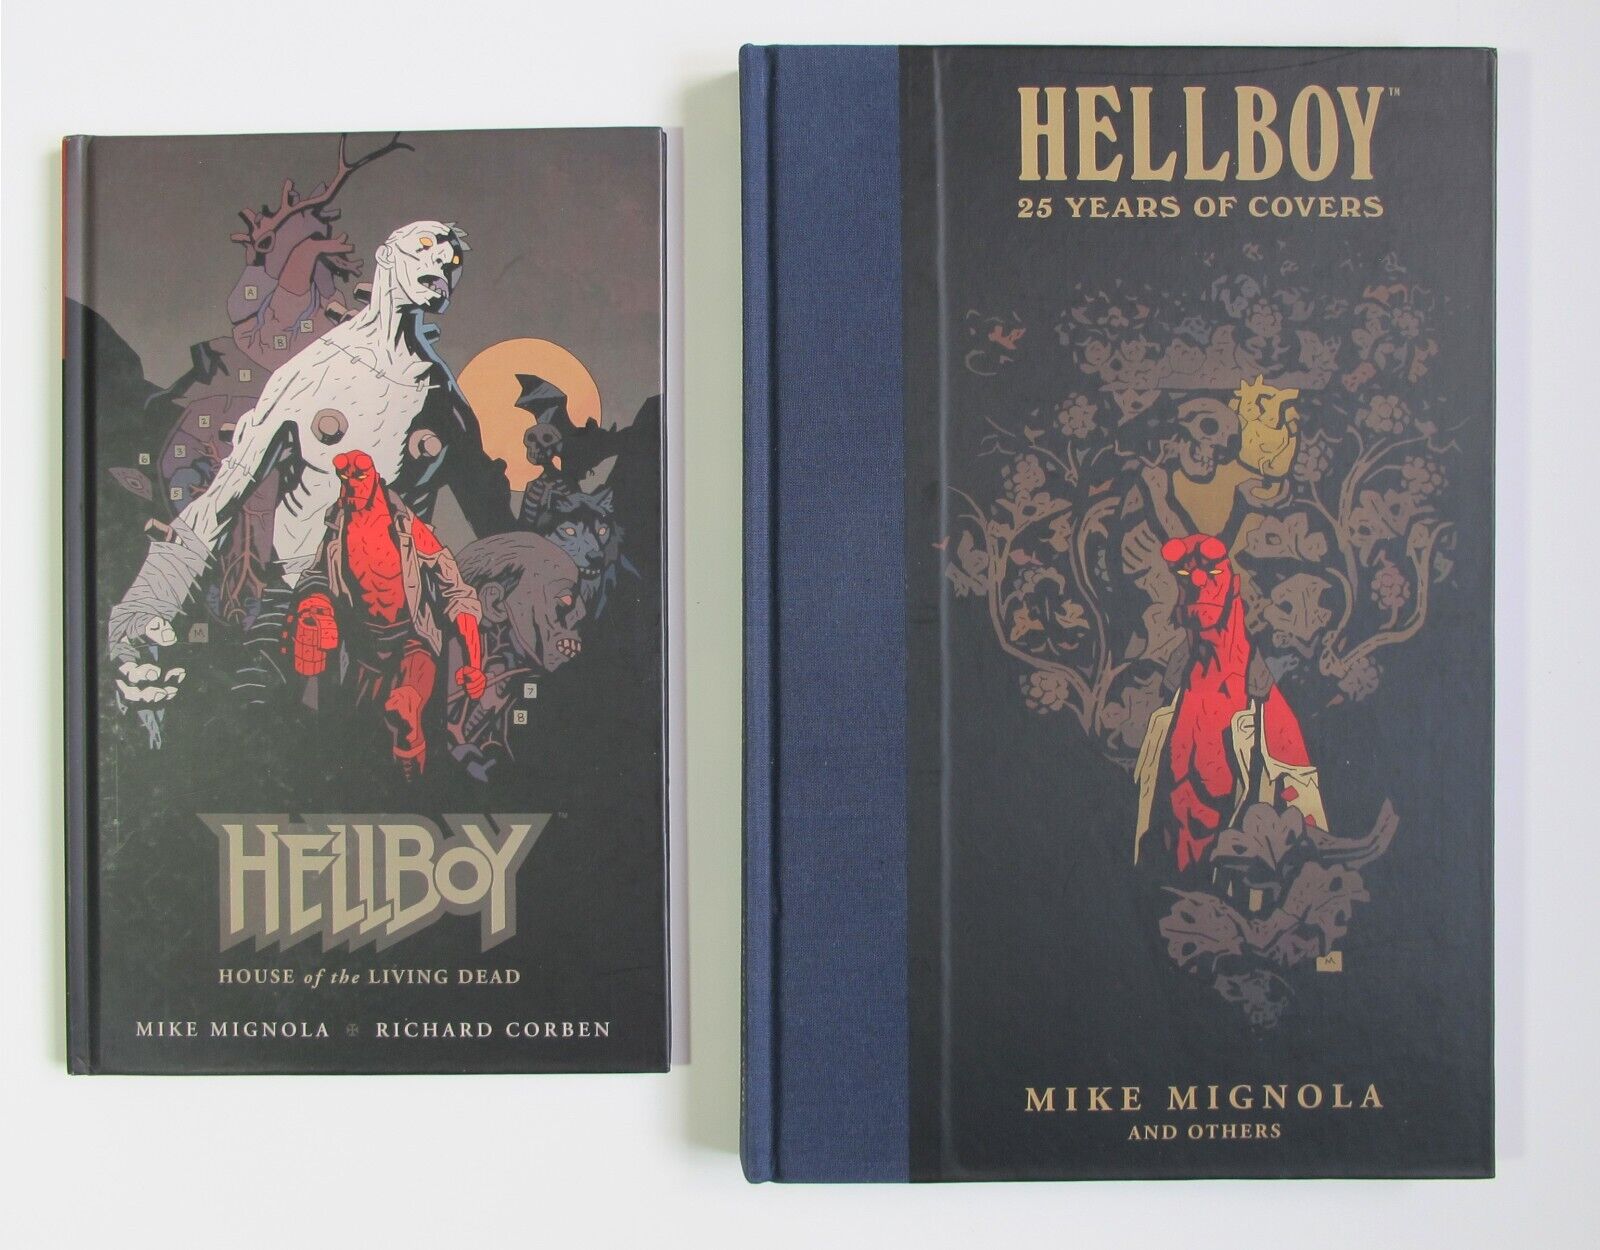 HELLBOY HC 25 YEARS OF COVERS + HOUSE OF THE LIVING DEAD CORBEN HARDCOVER